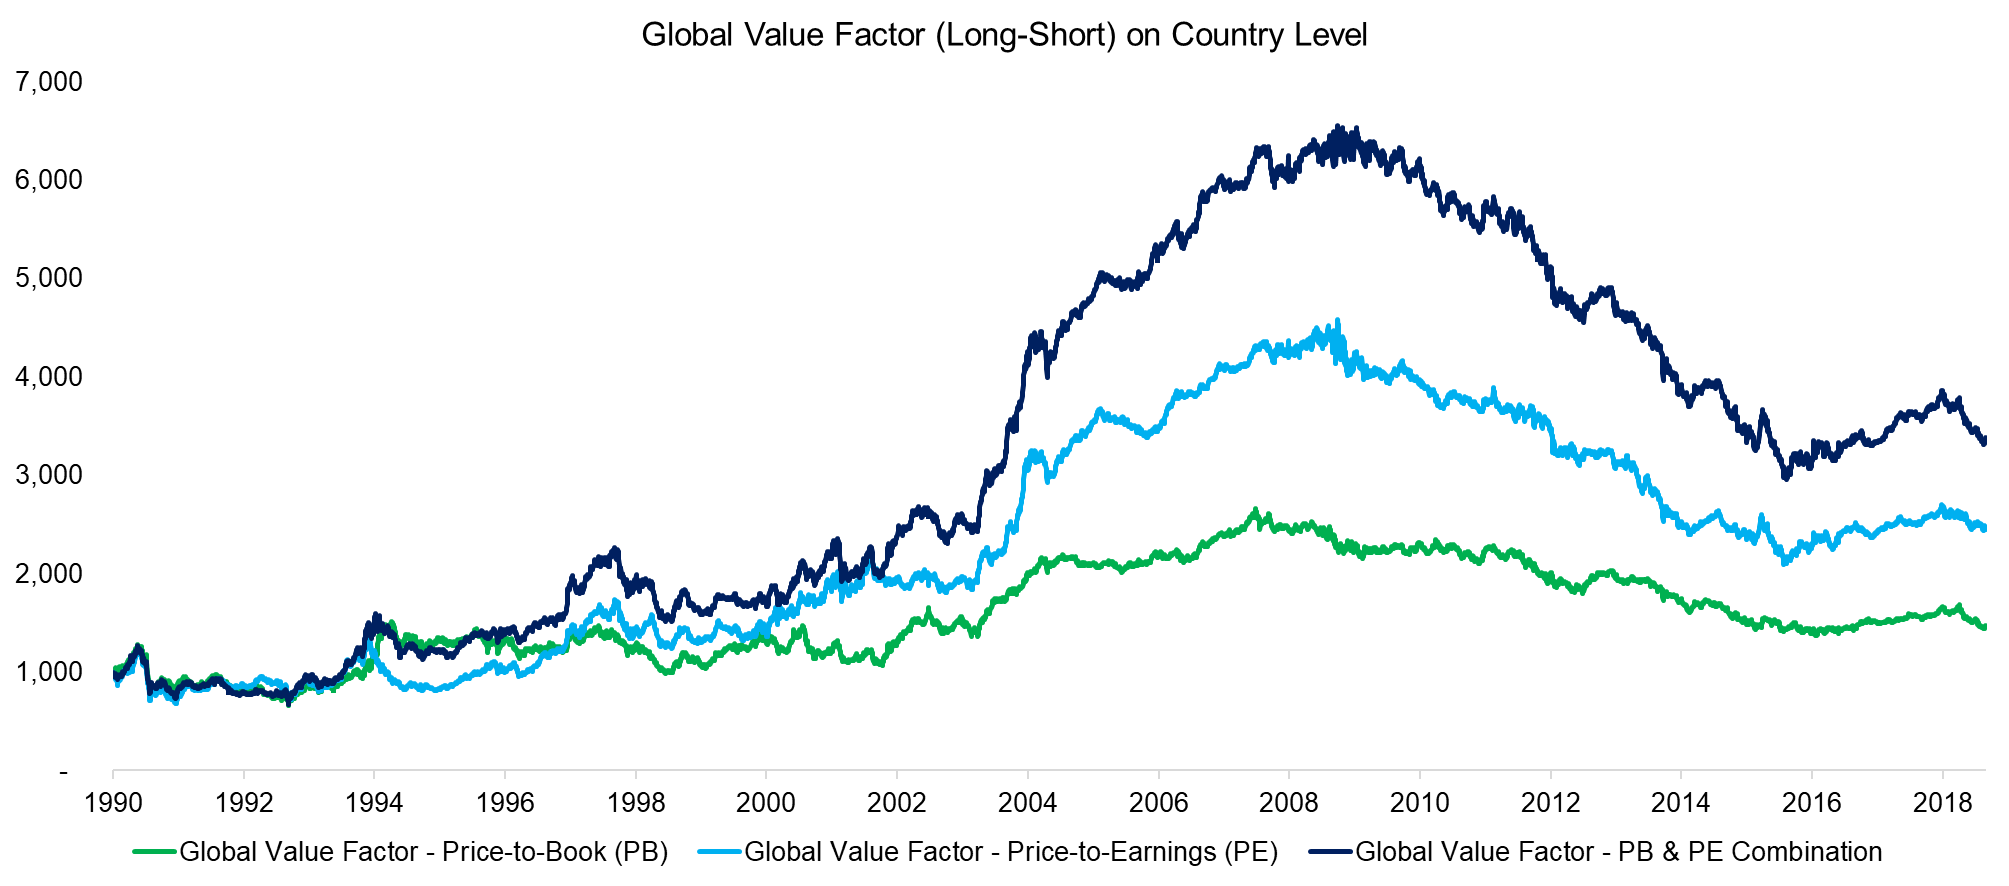 Global Value Factor (Long-Short) on Country Level